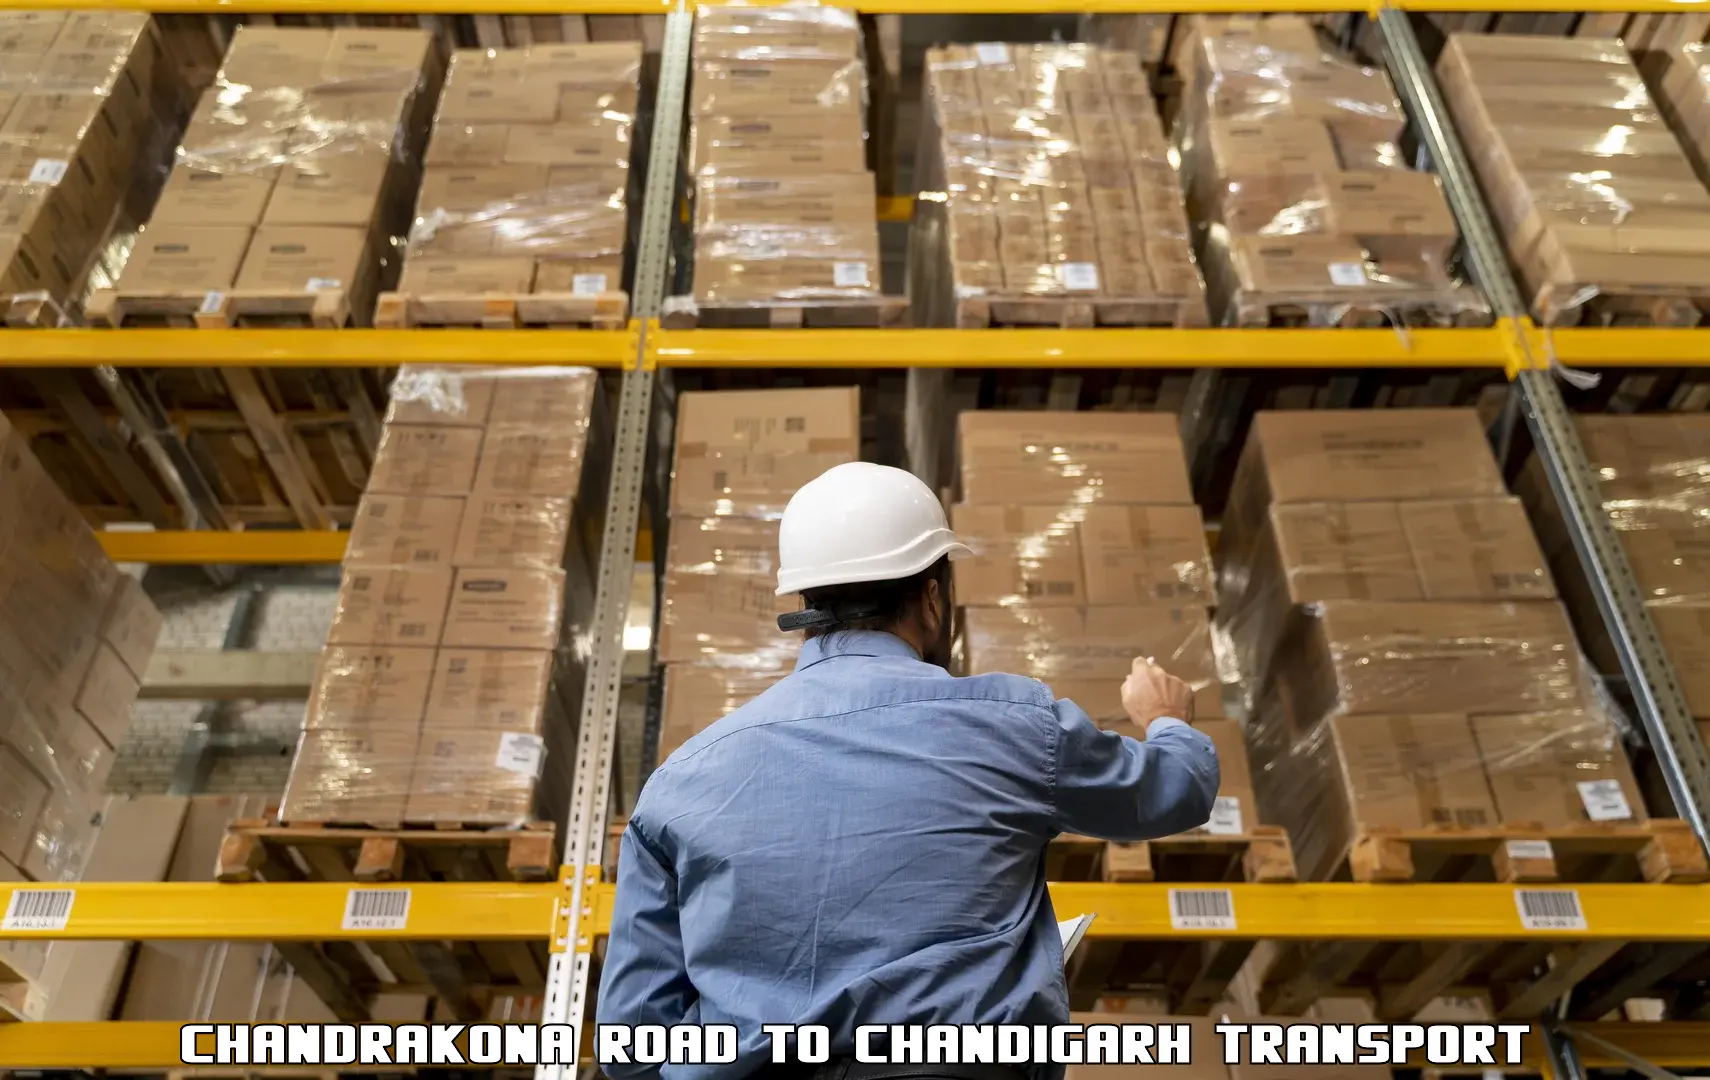 Commercial transport service Chandrakona Road to Chandigarh